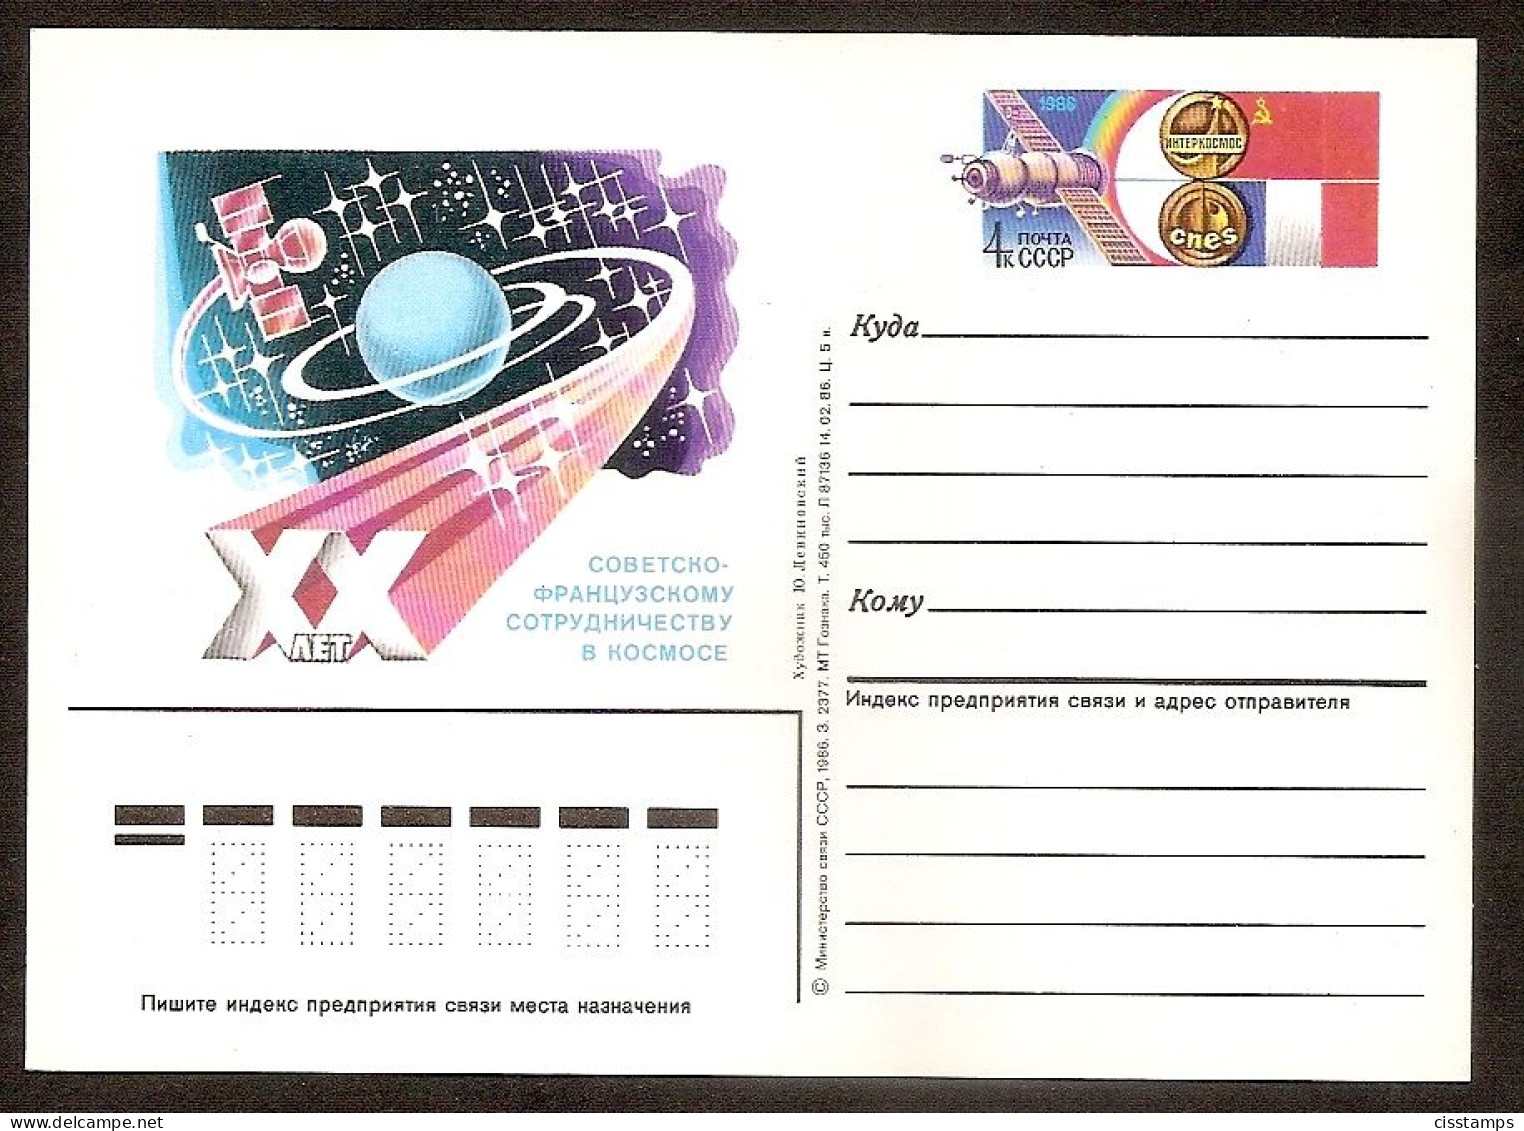 Russia USSR 1986●20th Anniv. Of Soviet-French Cooperation In Space●Soyuz●●stamped Stationery●postal Card●Mi PSo157 - 1980-91